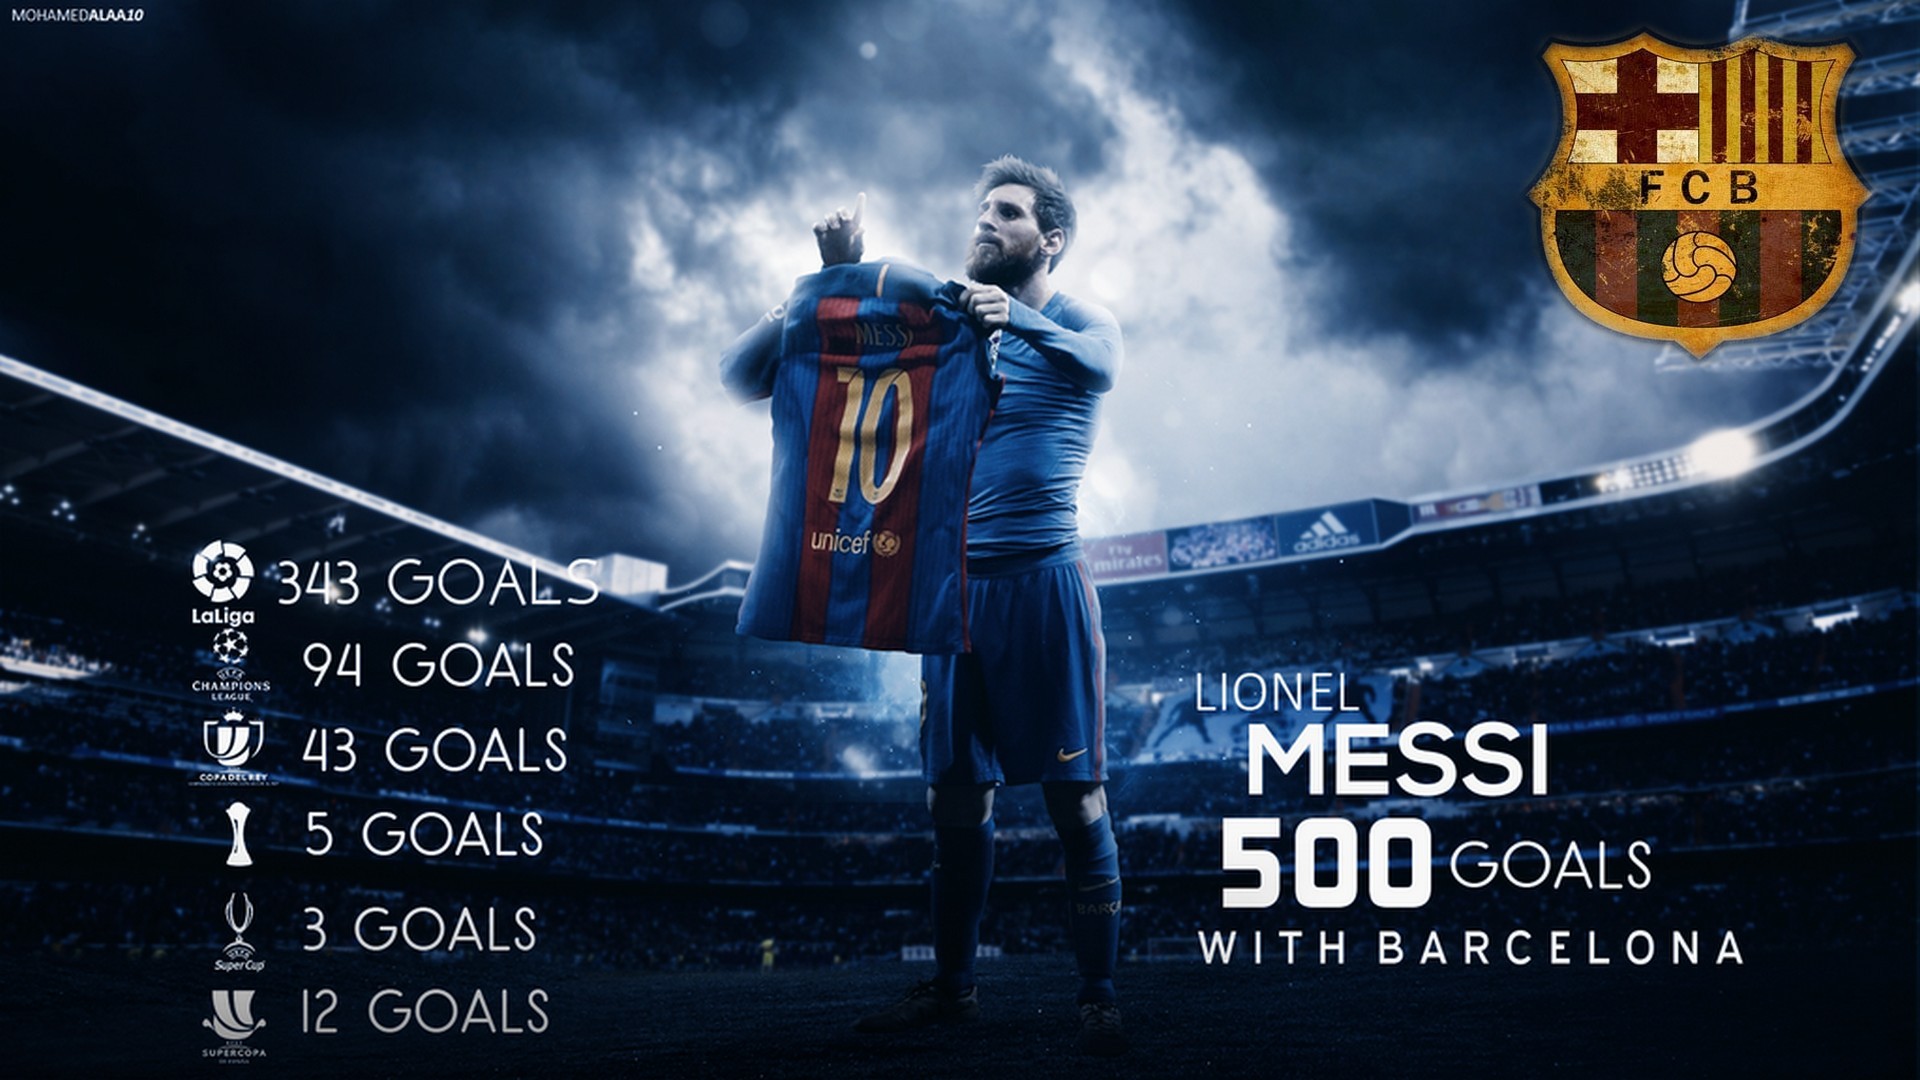 Messi HD Wallpapers with resolution 1920x1080 pixel. You can make this wallpaper for your Mac or Windows Desktop Background, iPhone, Android or Tablet and another Smartphone device